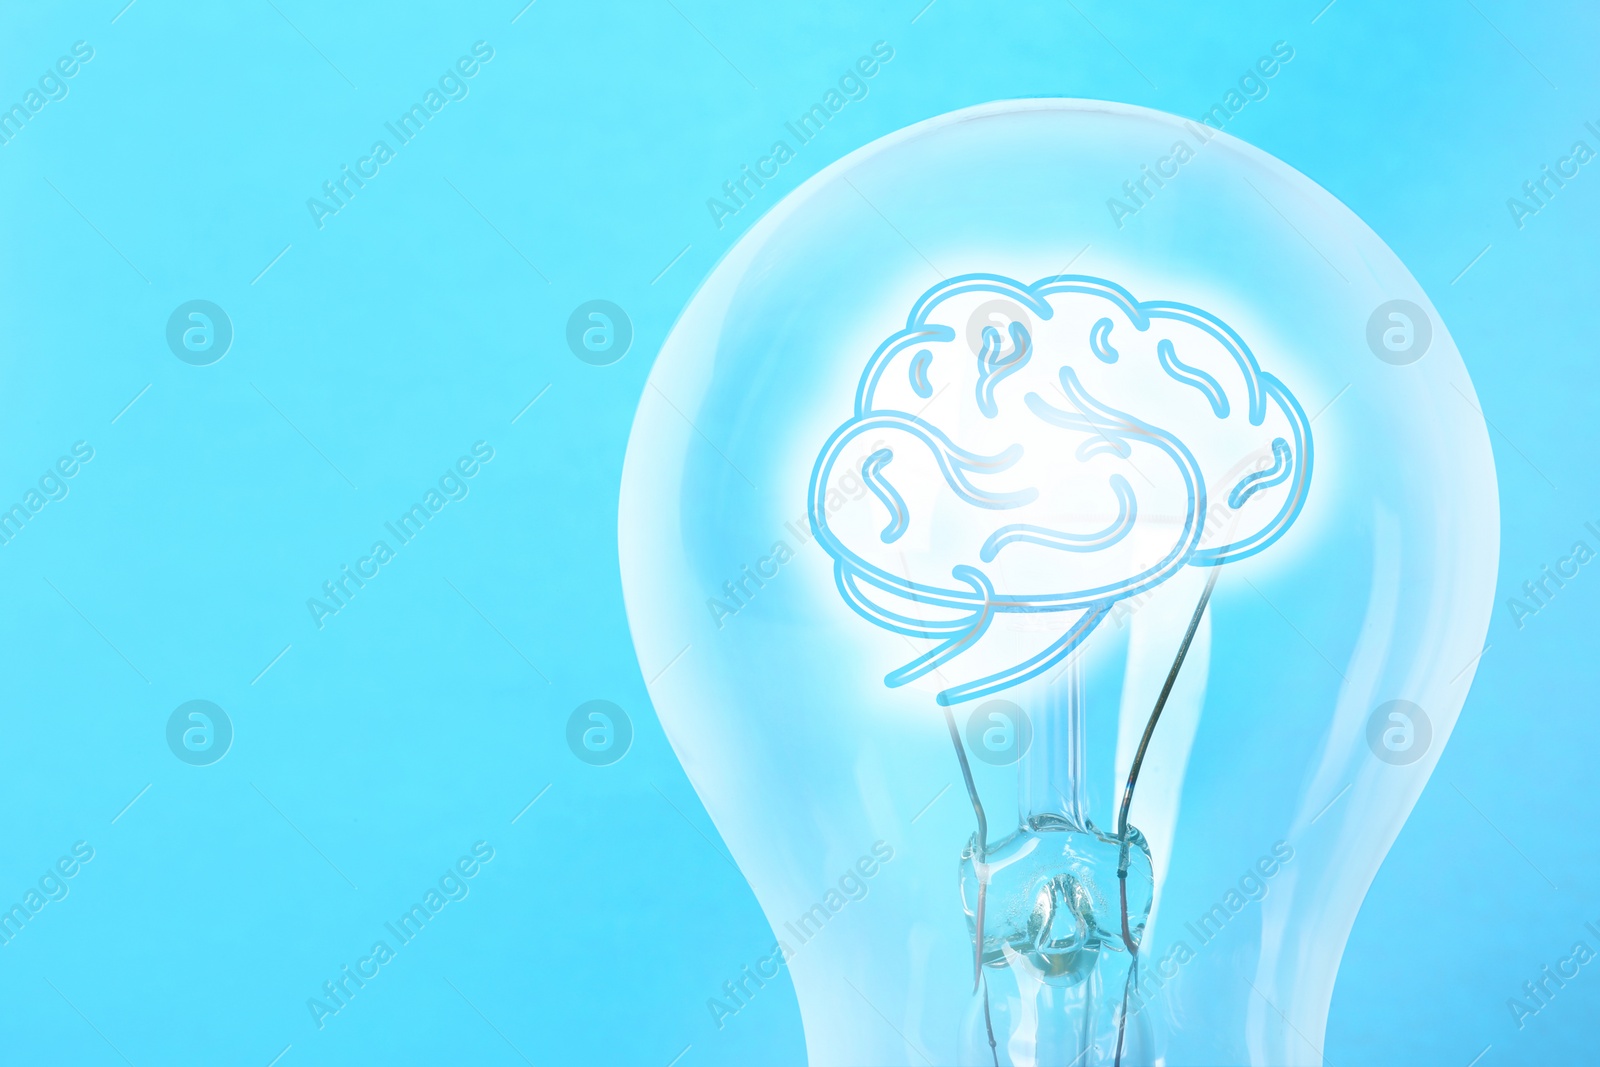 Image of Lamp bulb with human brain inside on light blue background, space for text. Idea generation